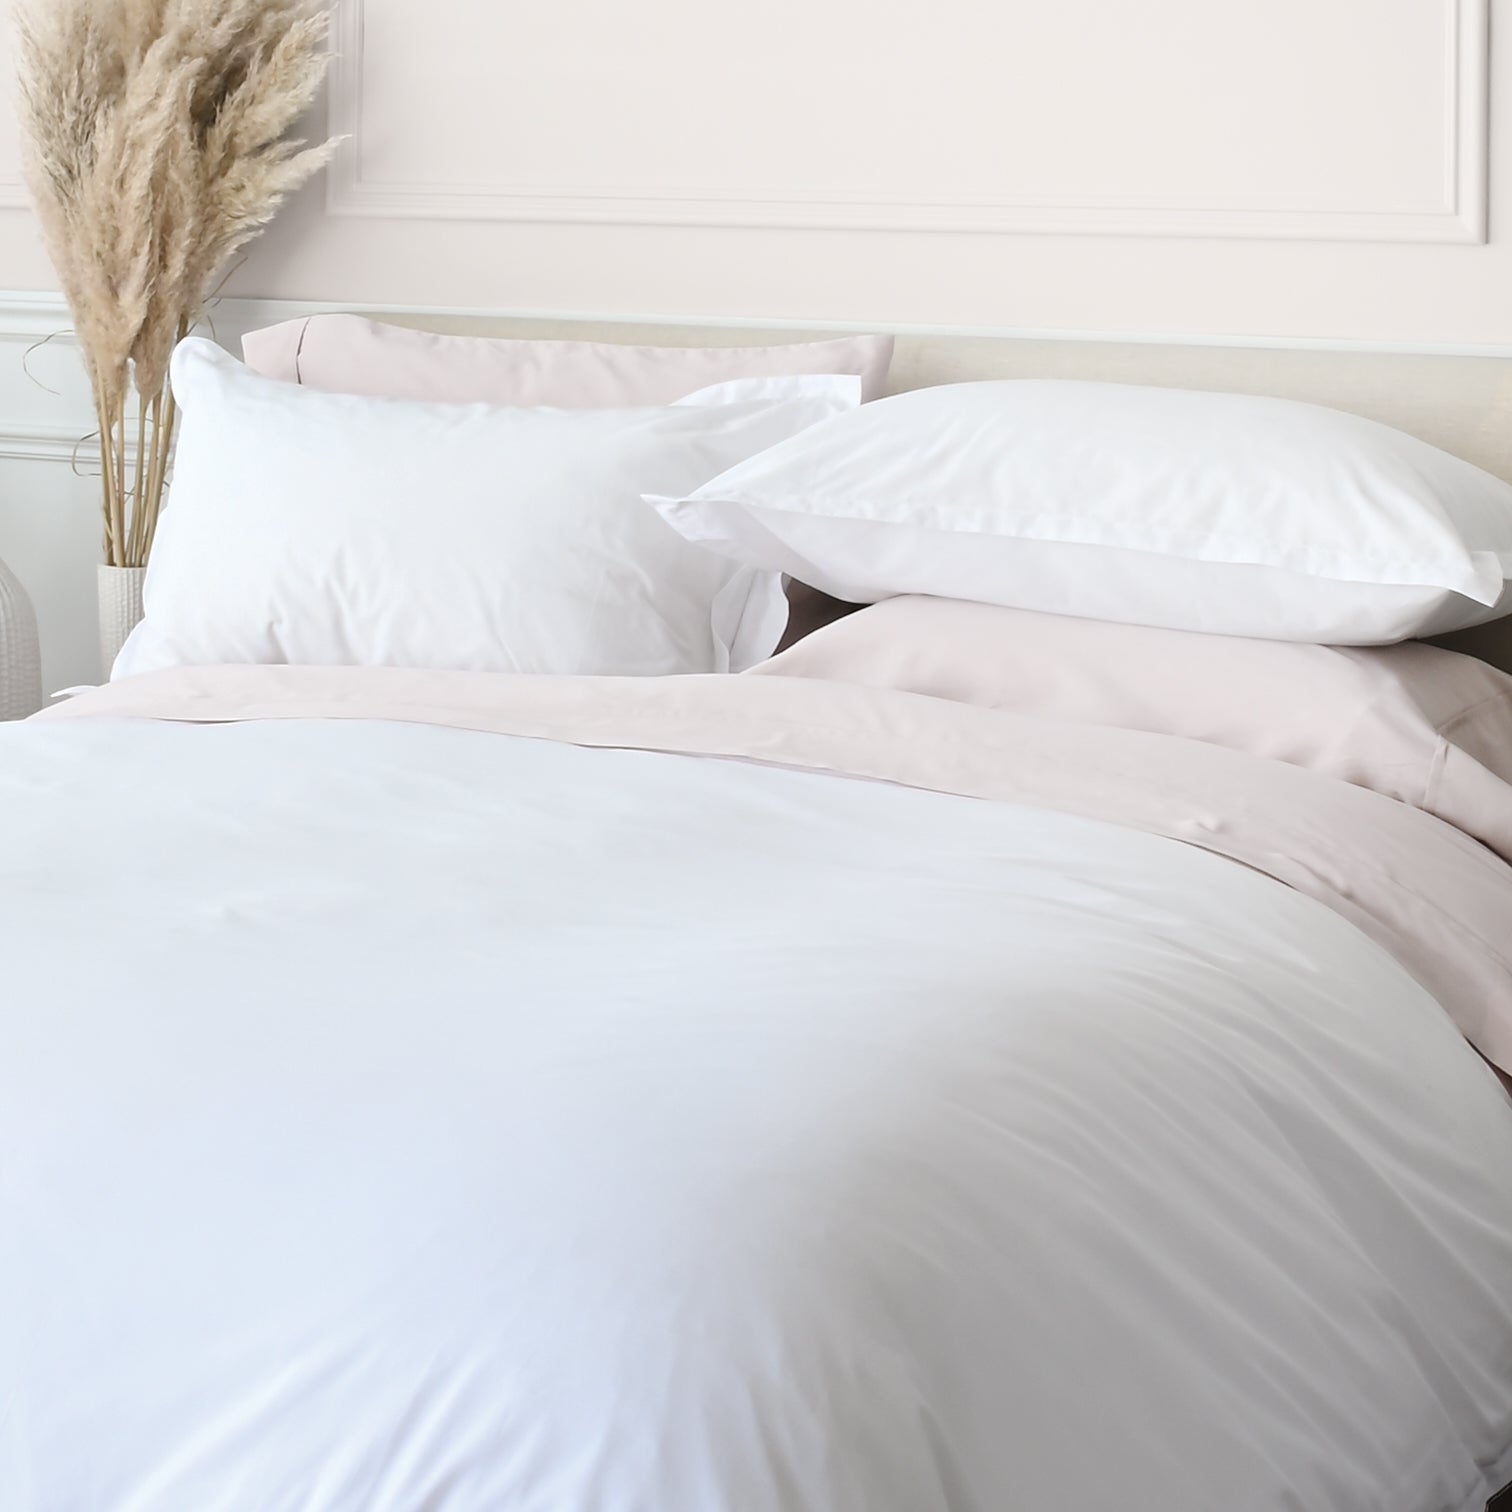 Sussrro Cotton Duvet Covers and Shams